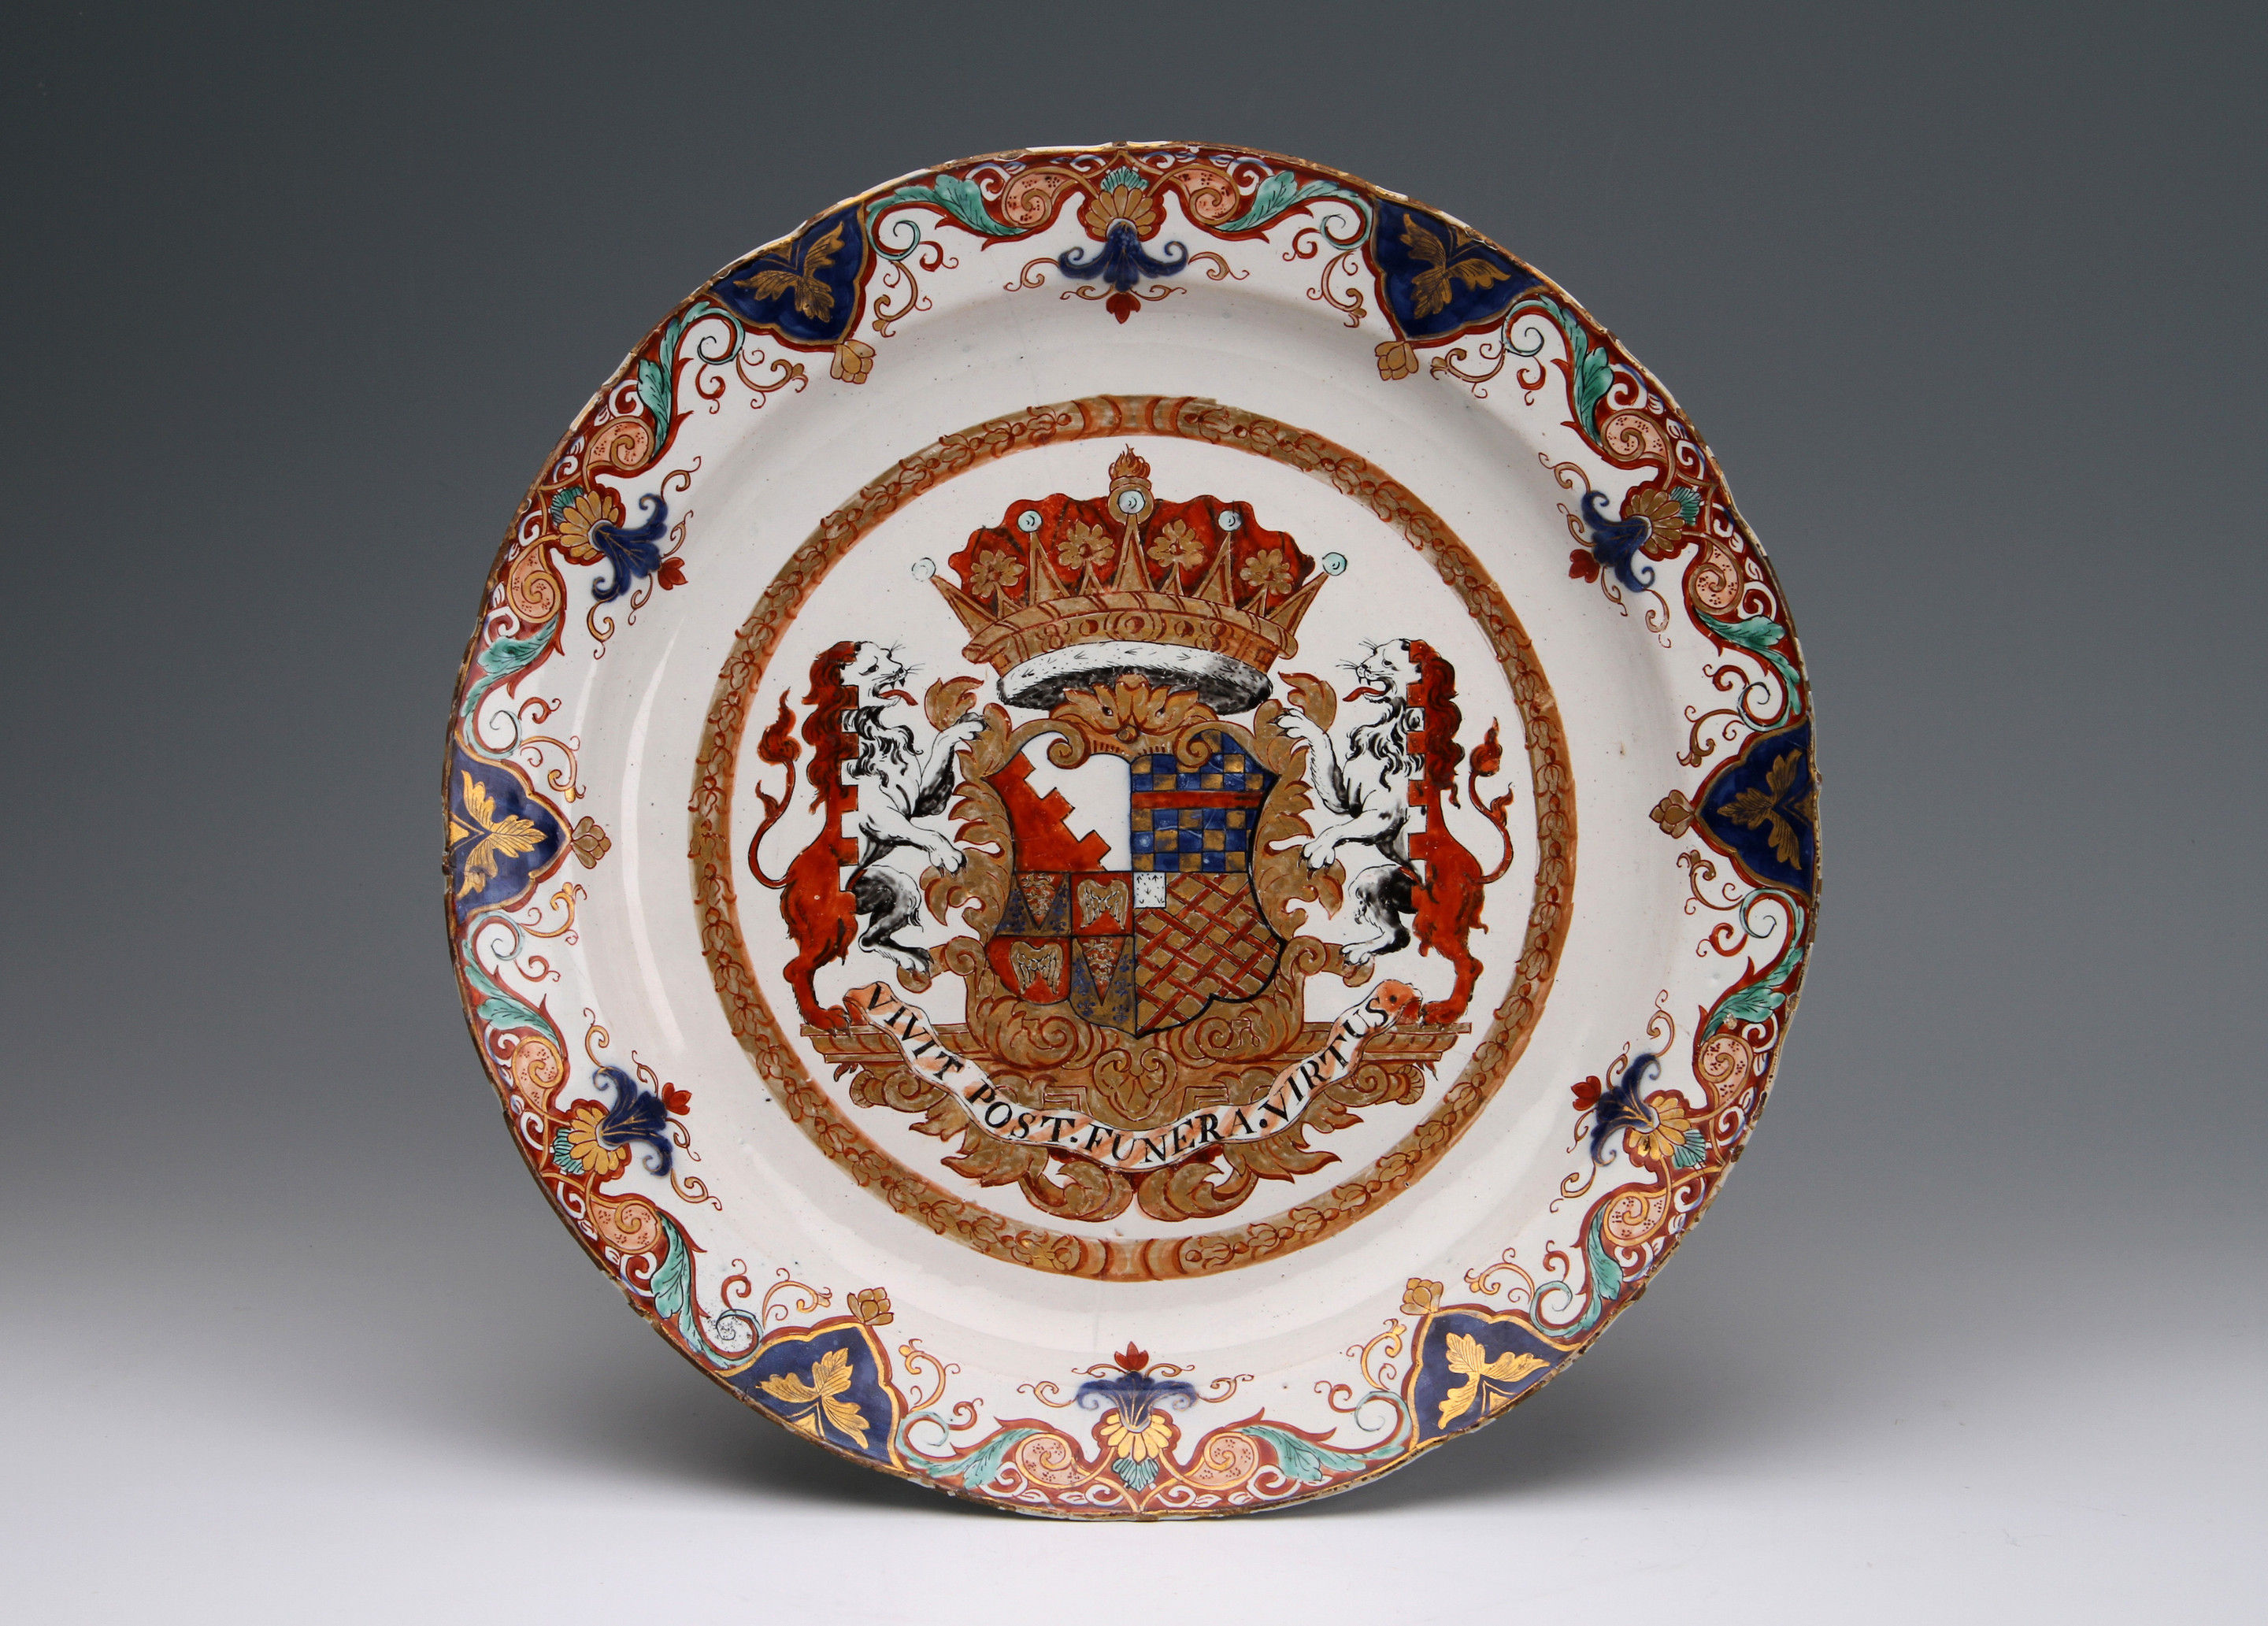 A Dutch Delft delft-doré dish painted with the arms of Boyle